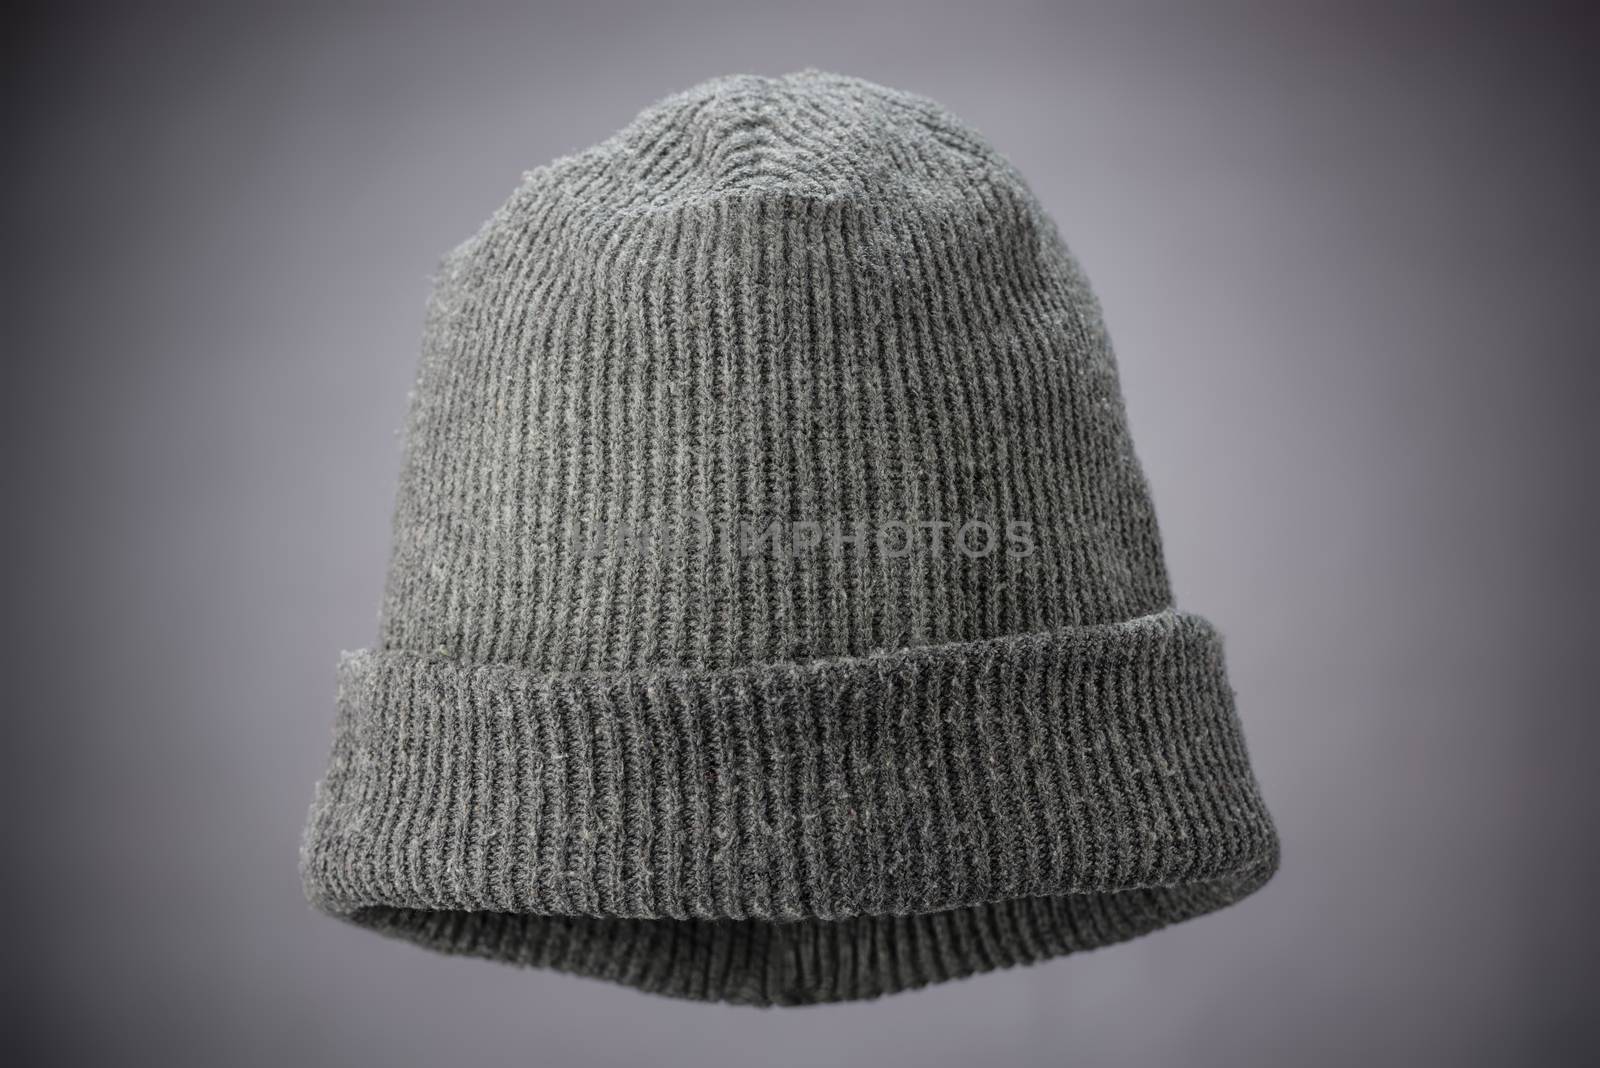 A studio shot of a grey knit cap suspended on a grey background lit with a natural vignette.